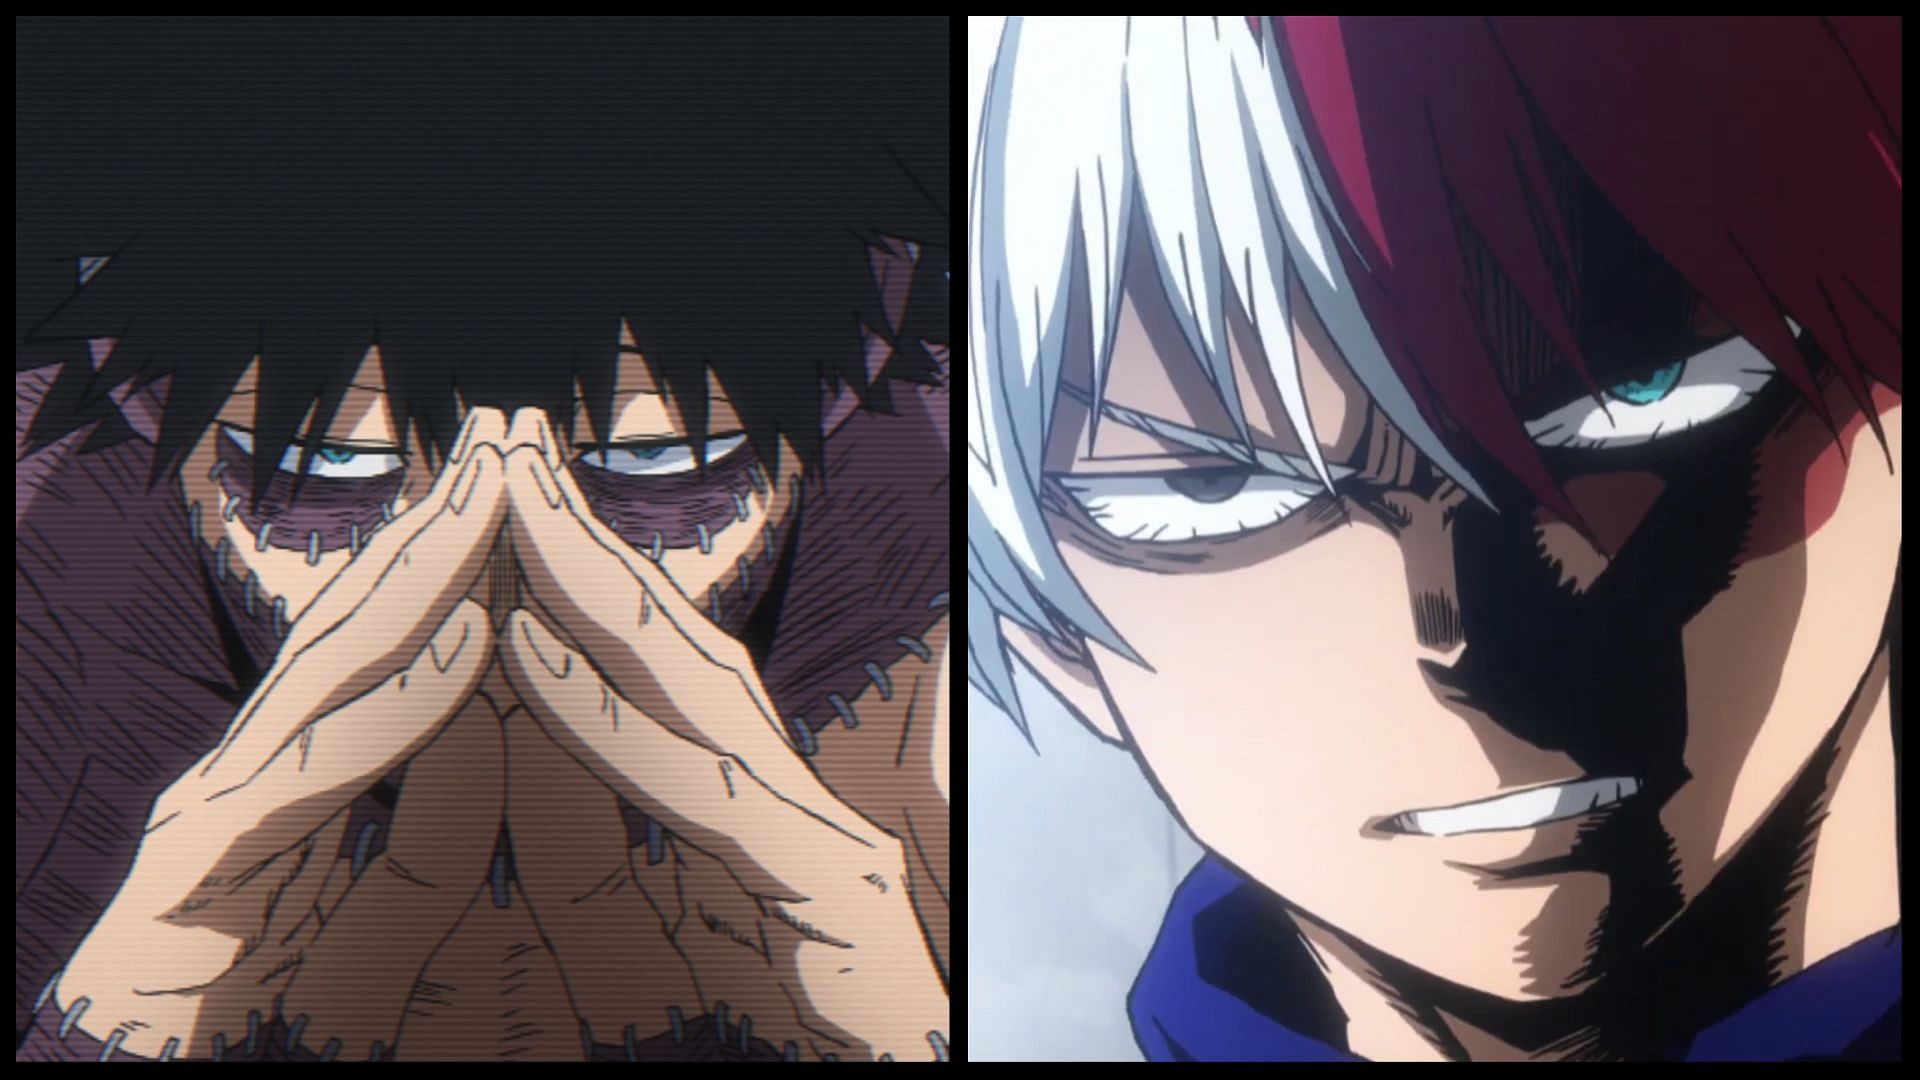 Toya (left) and Shoto (right) Todoroki as seen in the series